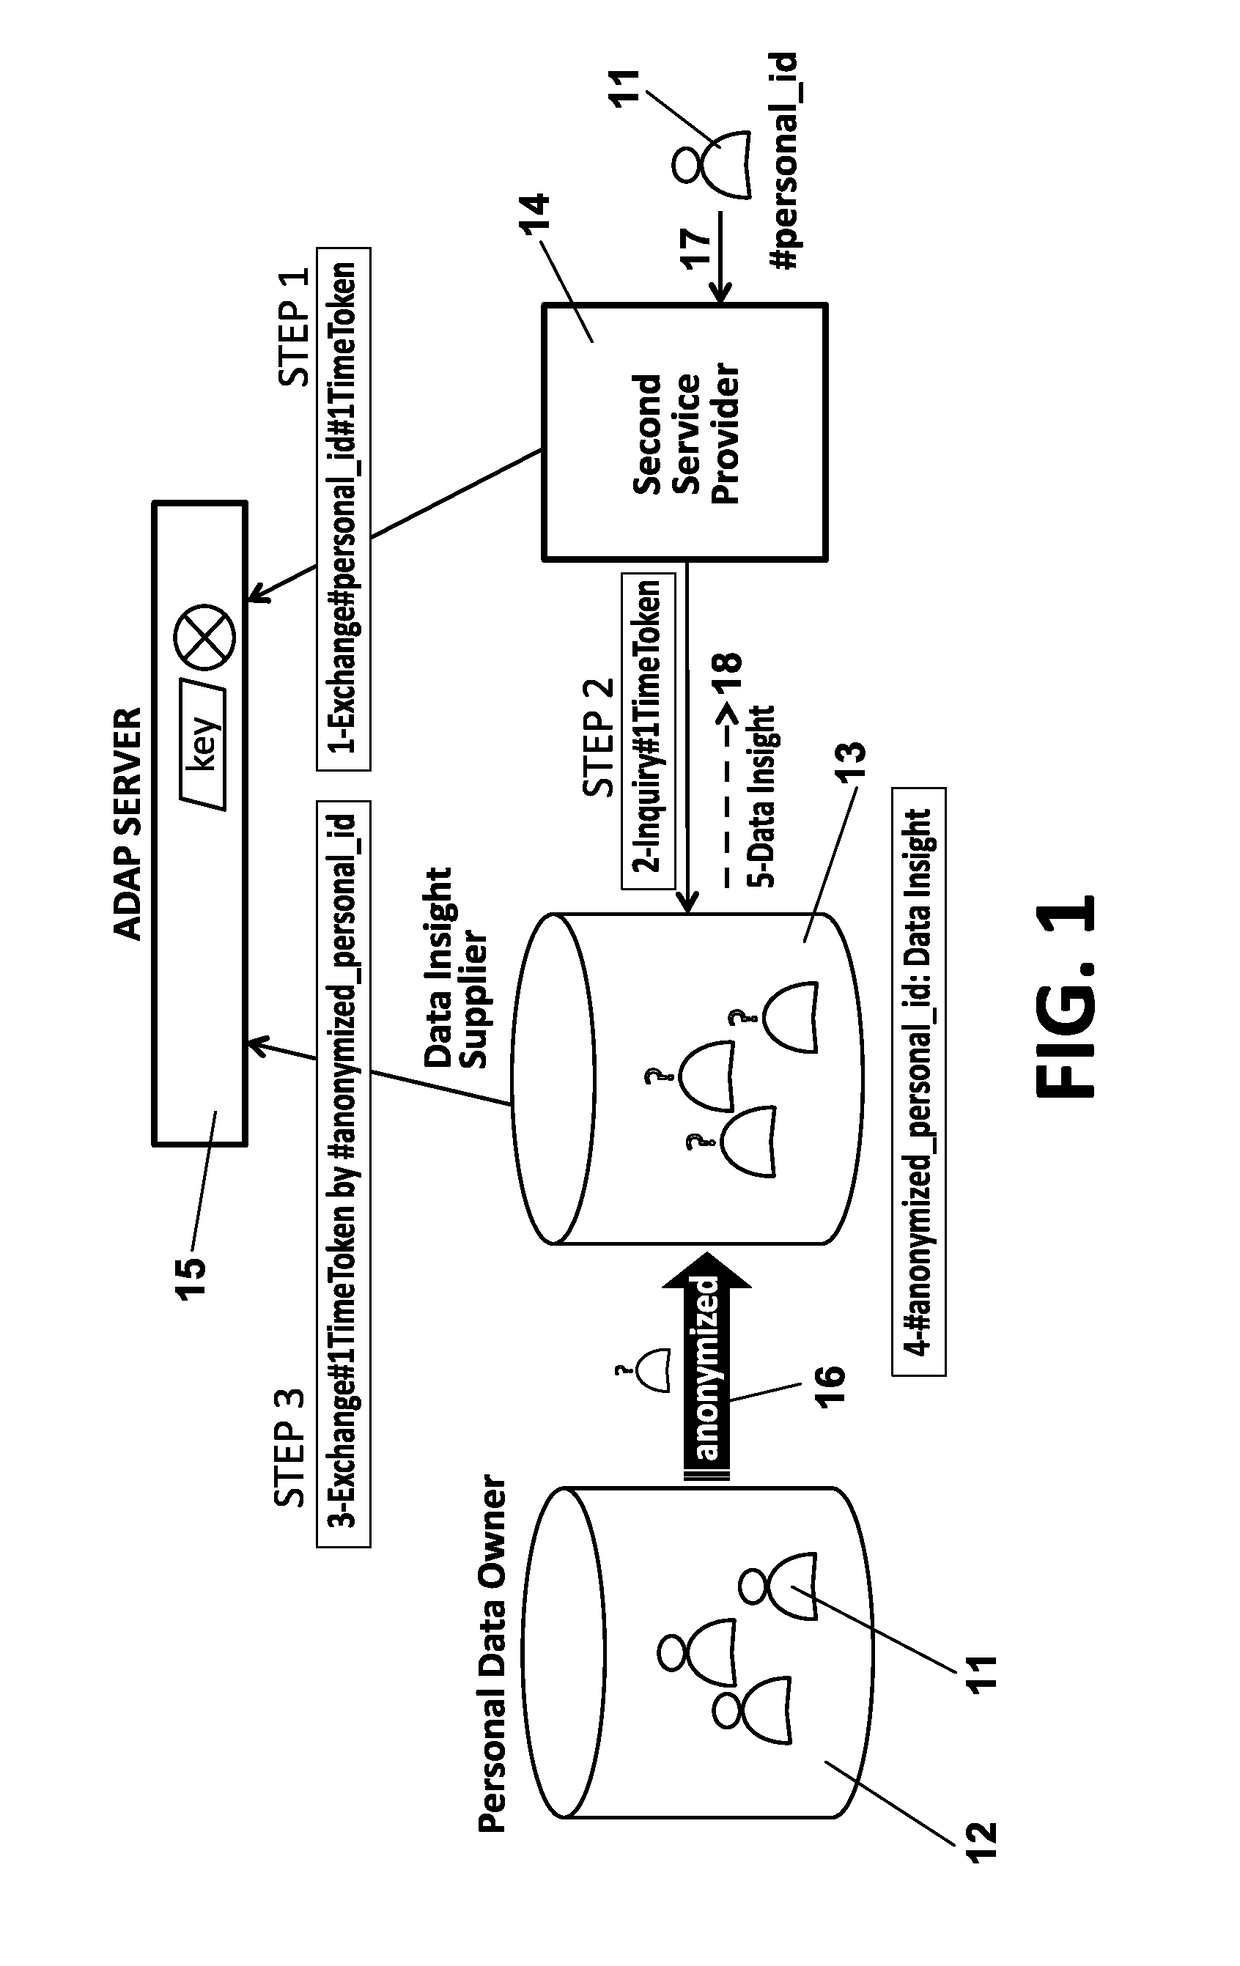 Methods, apparatus and system for improved access of consumer's personal data